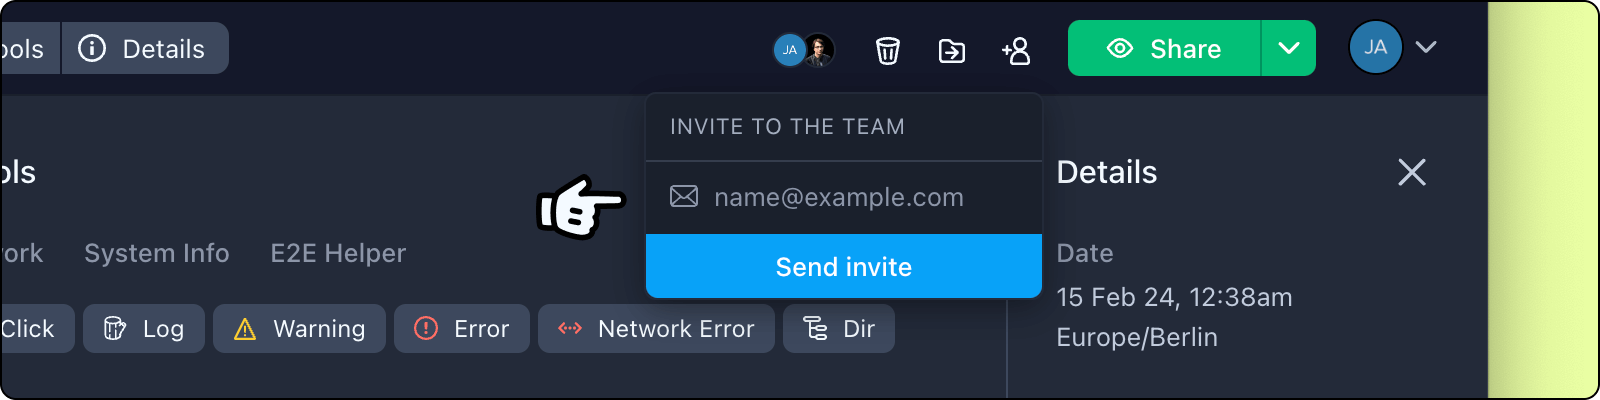 Invite team members from bug report